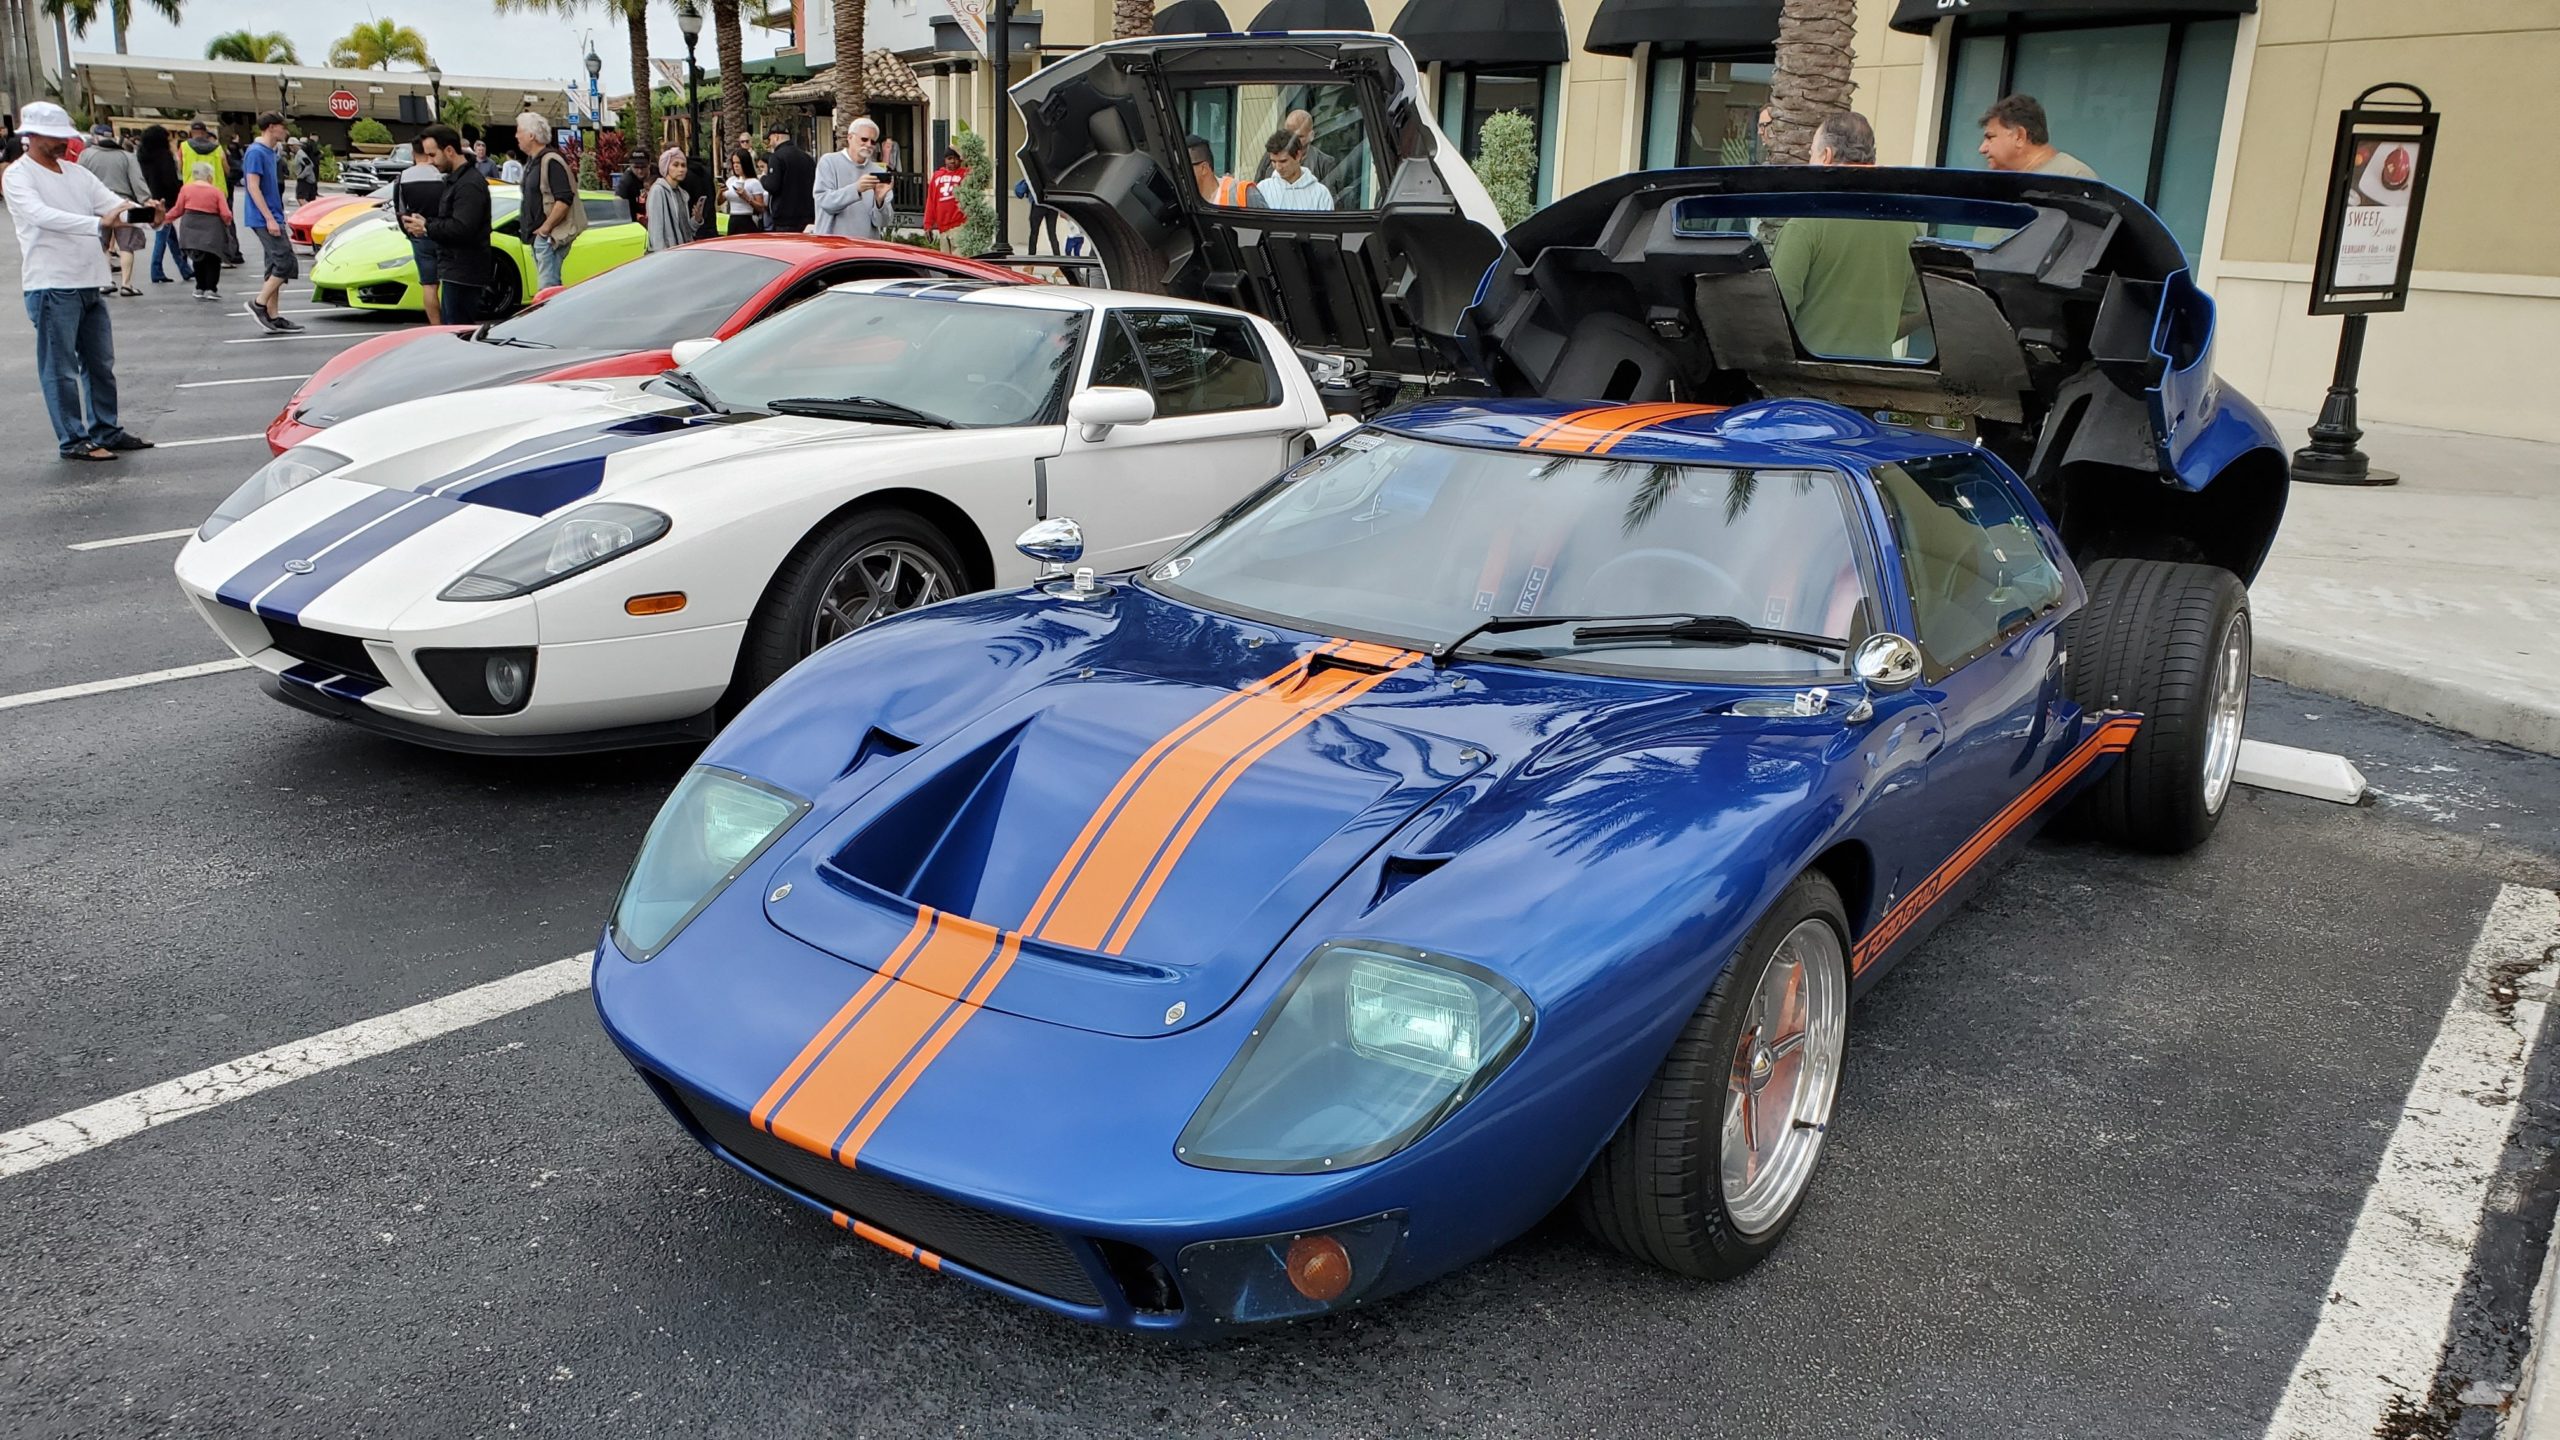 A Ford GT40 next to a Ford GT. It’s wild how short the GT40 is